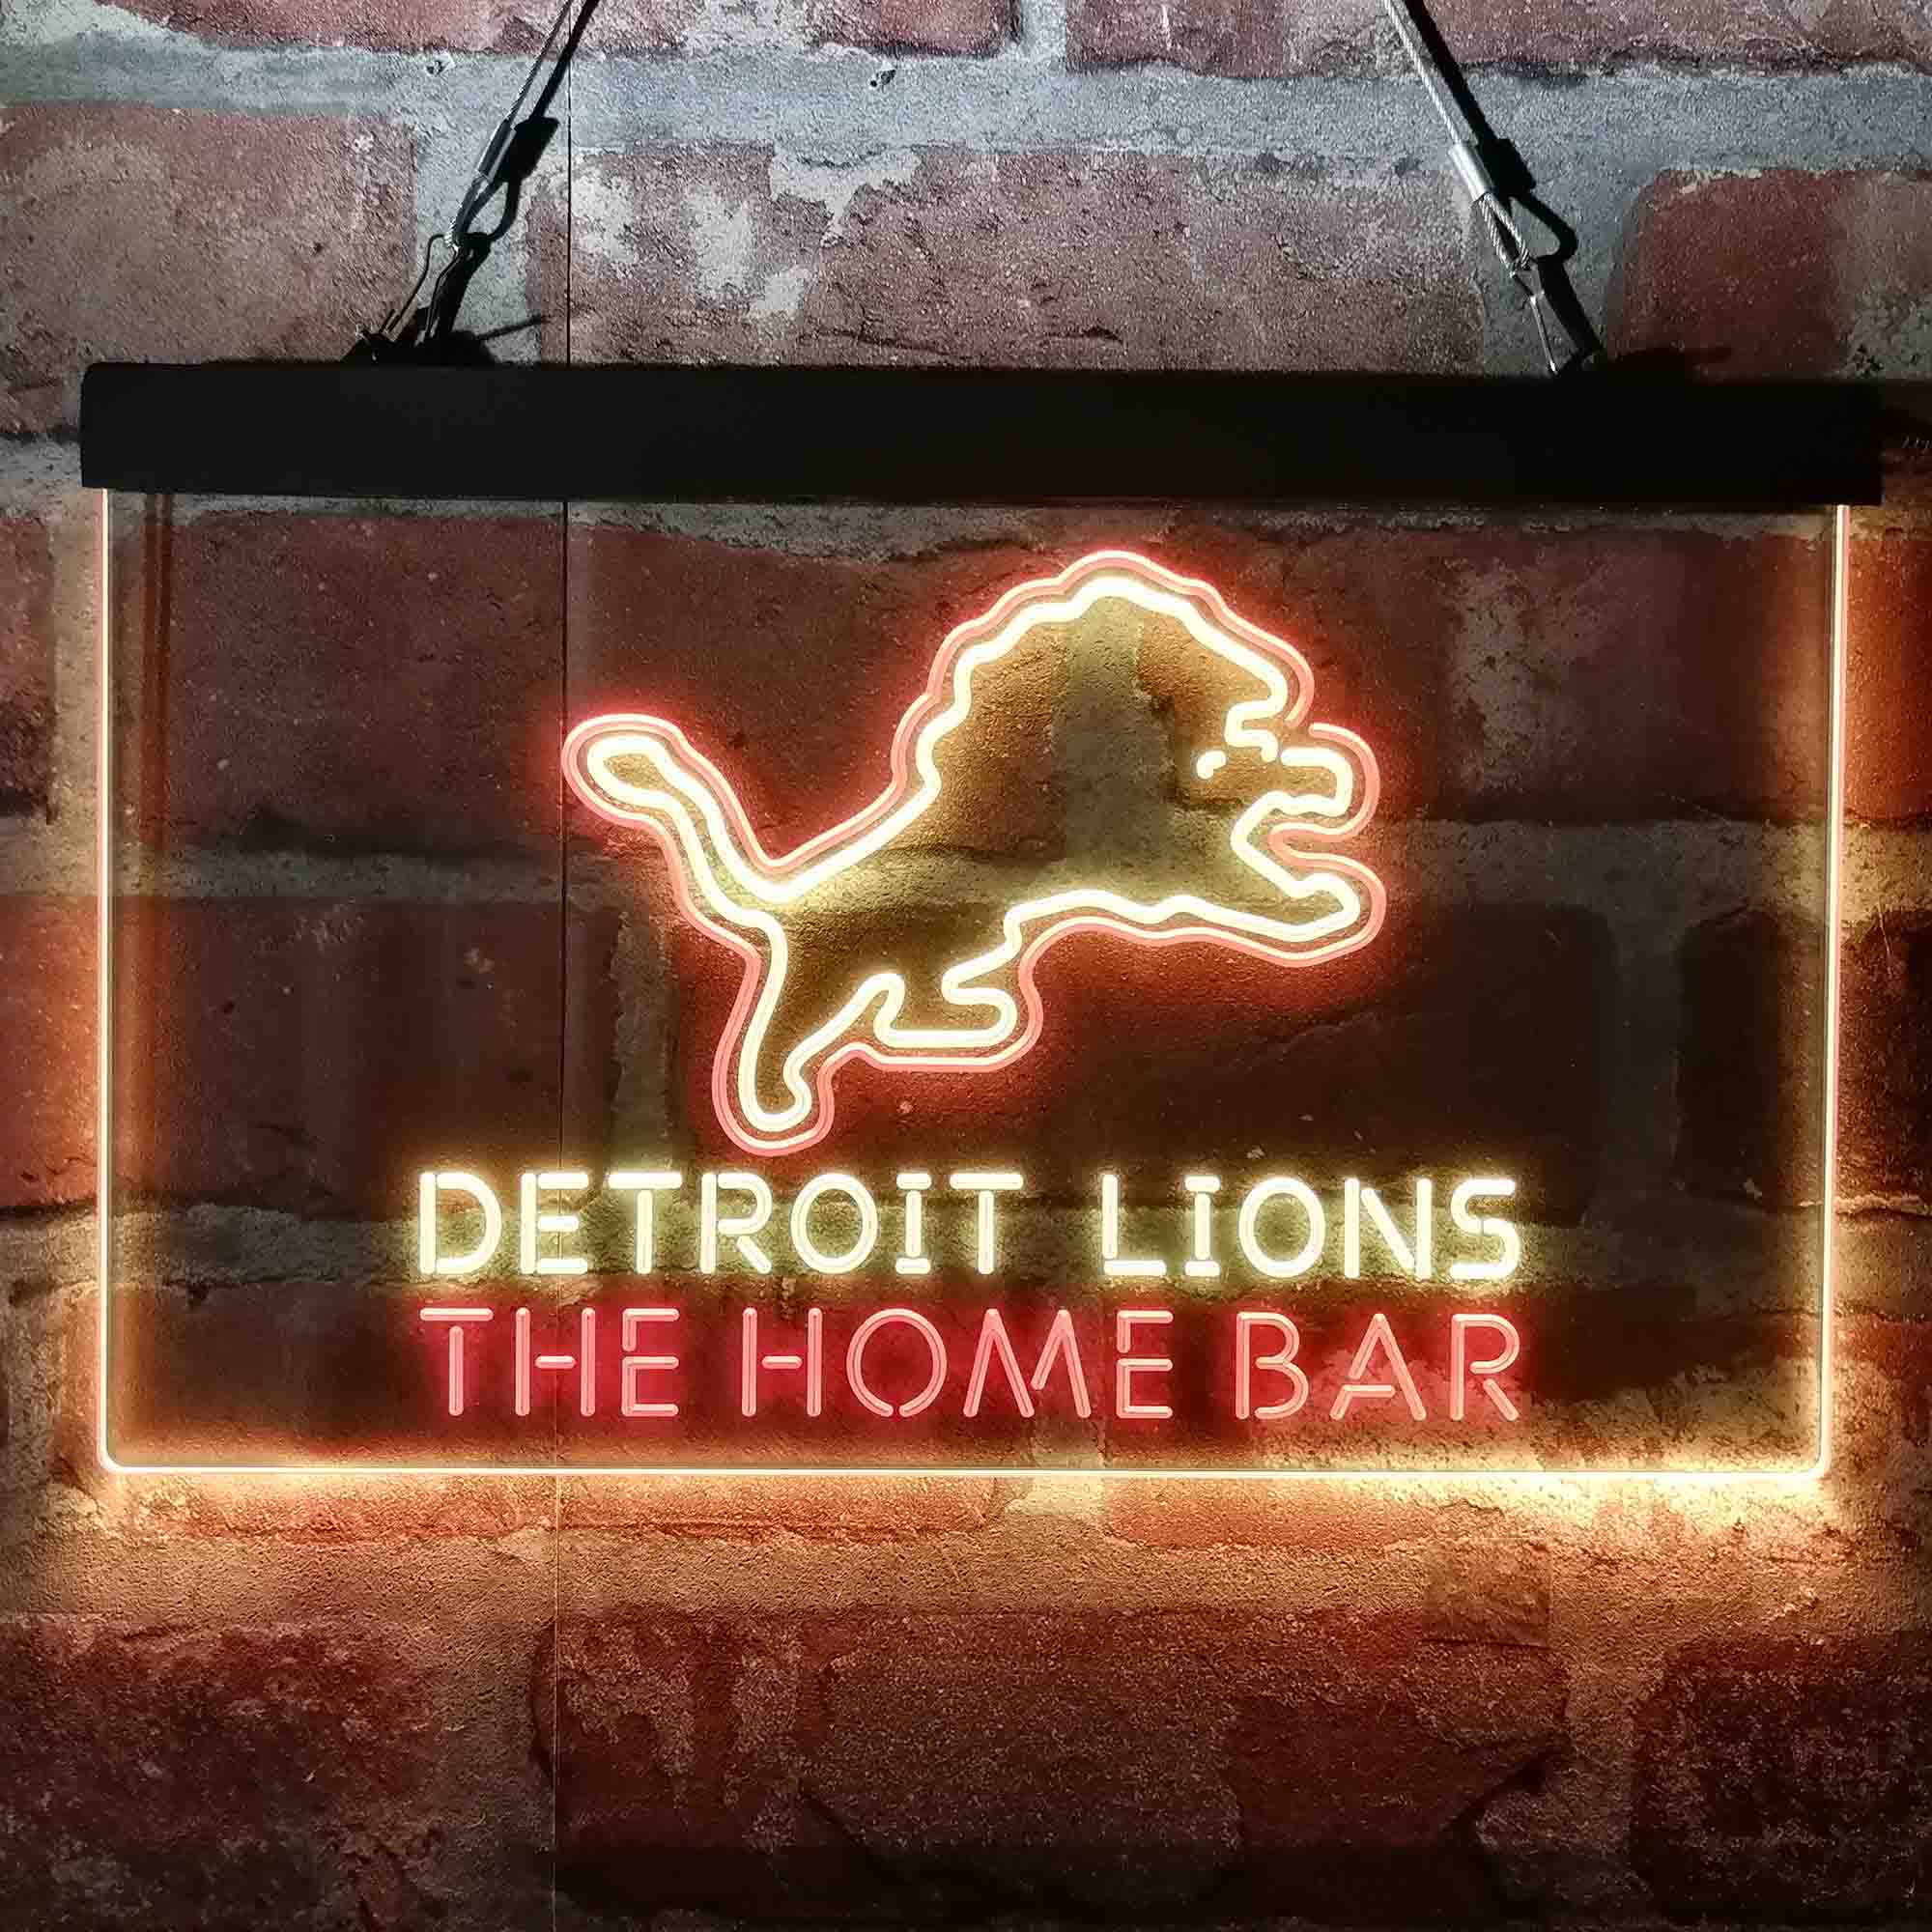 Personalized Detroits Lion Neon-Like LED Sign - Custom Wall Decor Gift